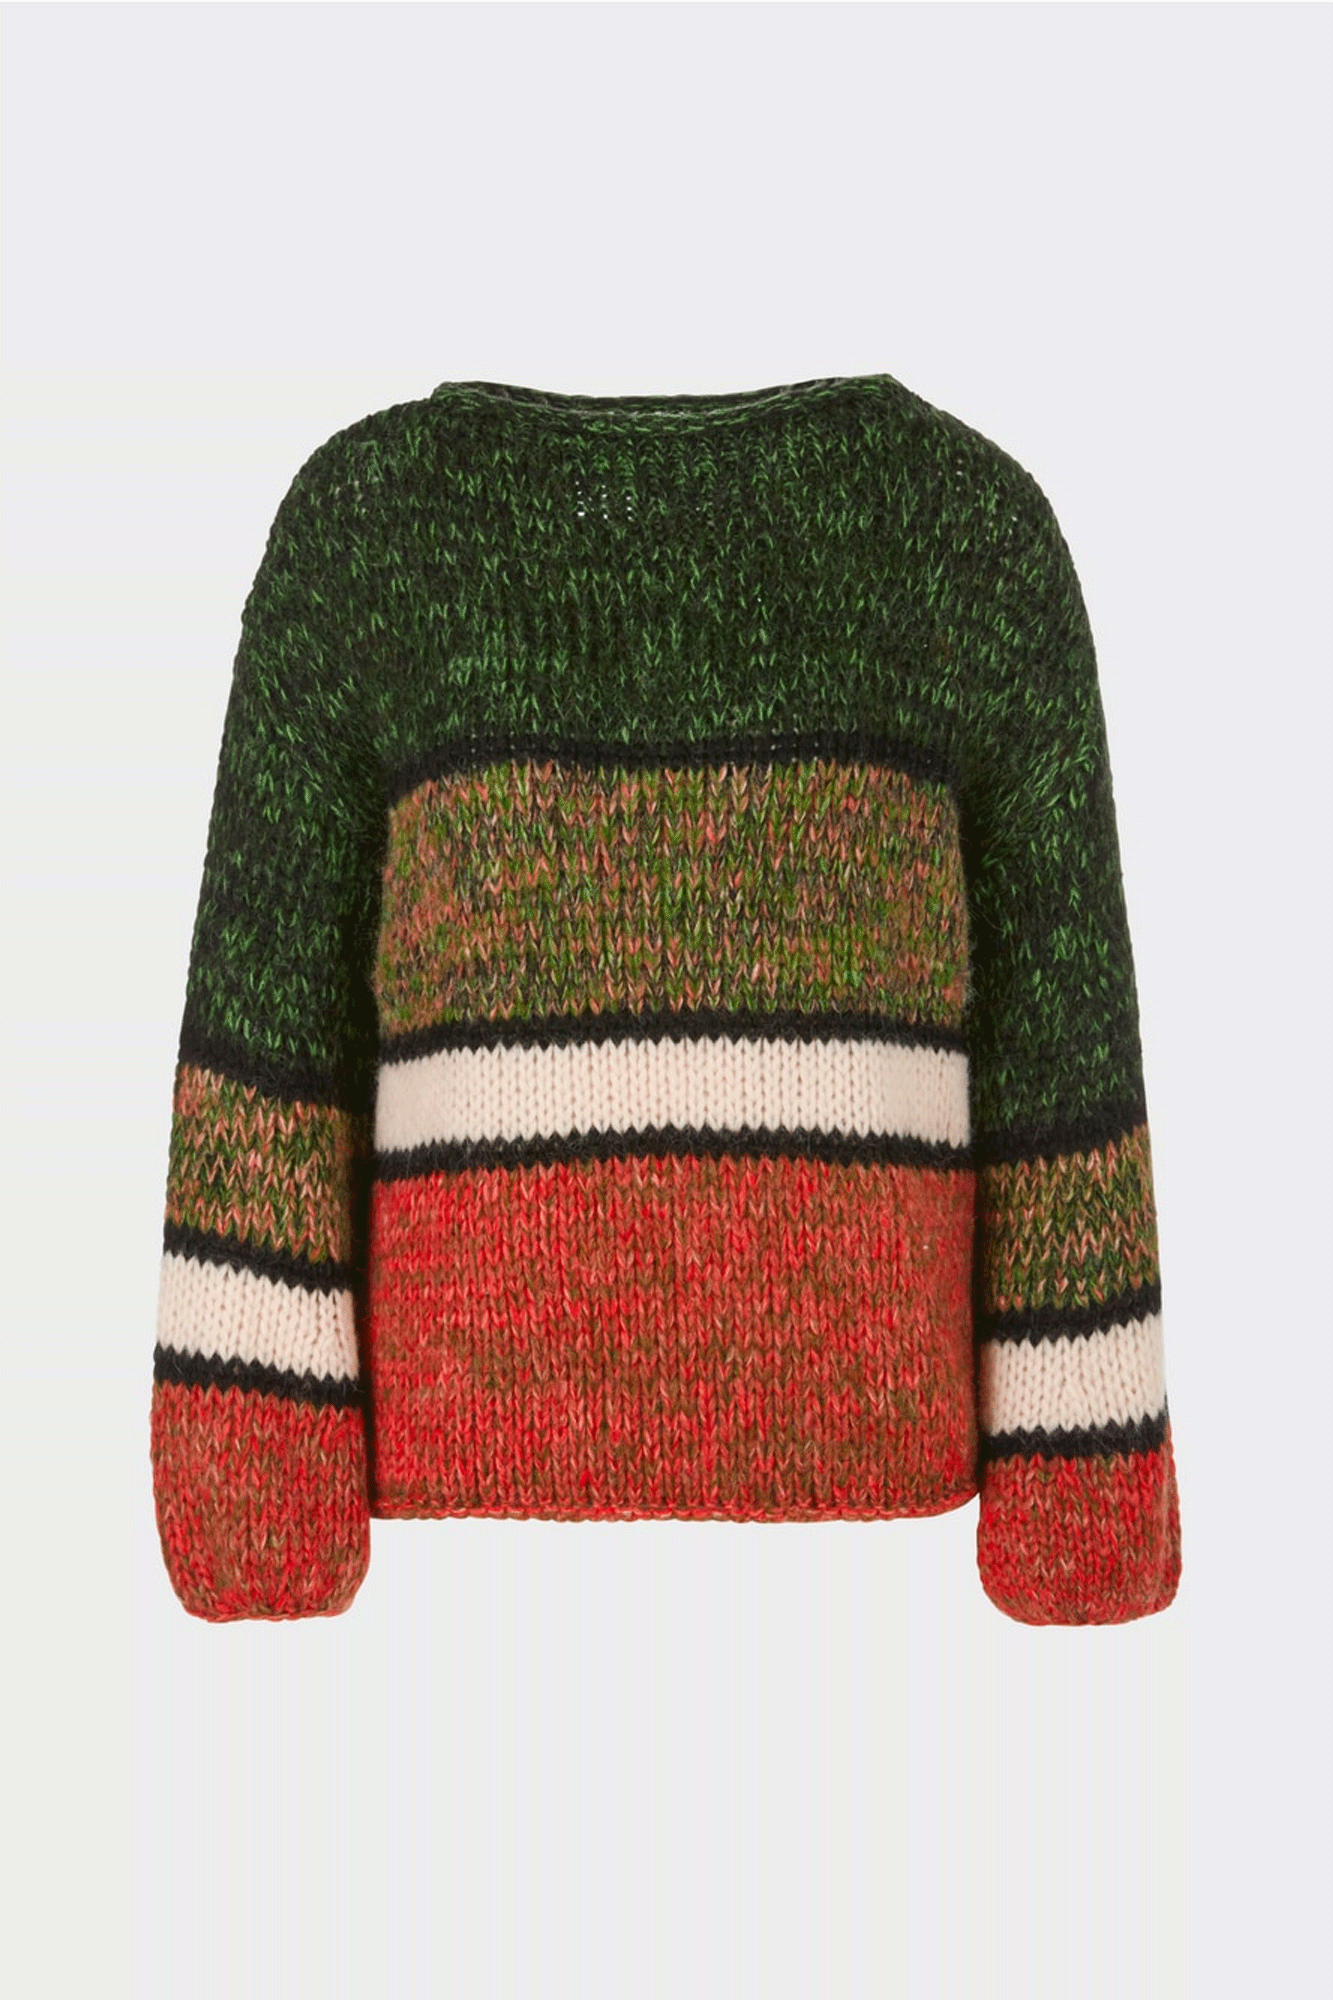 This Stripe Colorblock Sweater from Marc Cain is crafted from a wool-based blend, making it light and soft. It features an oversized cut, with blouse-like sleeves and raw edges. The colorblocking of mêlée and (non-)colors gives the piece a modern, unique look.